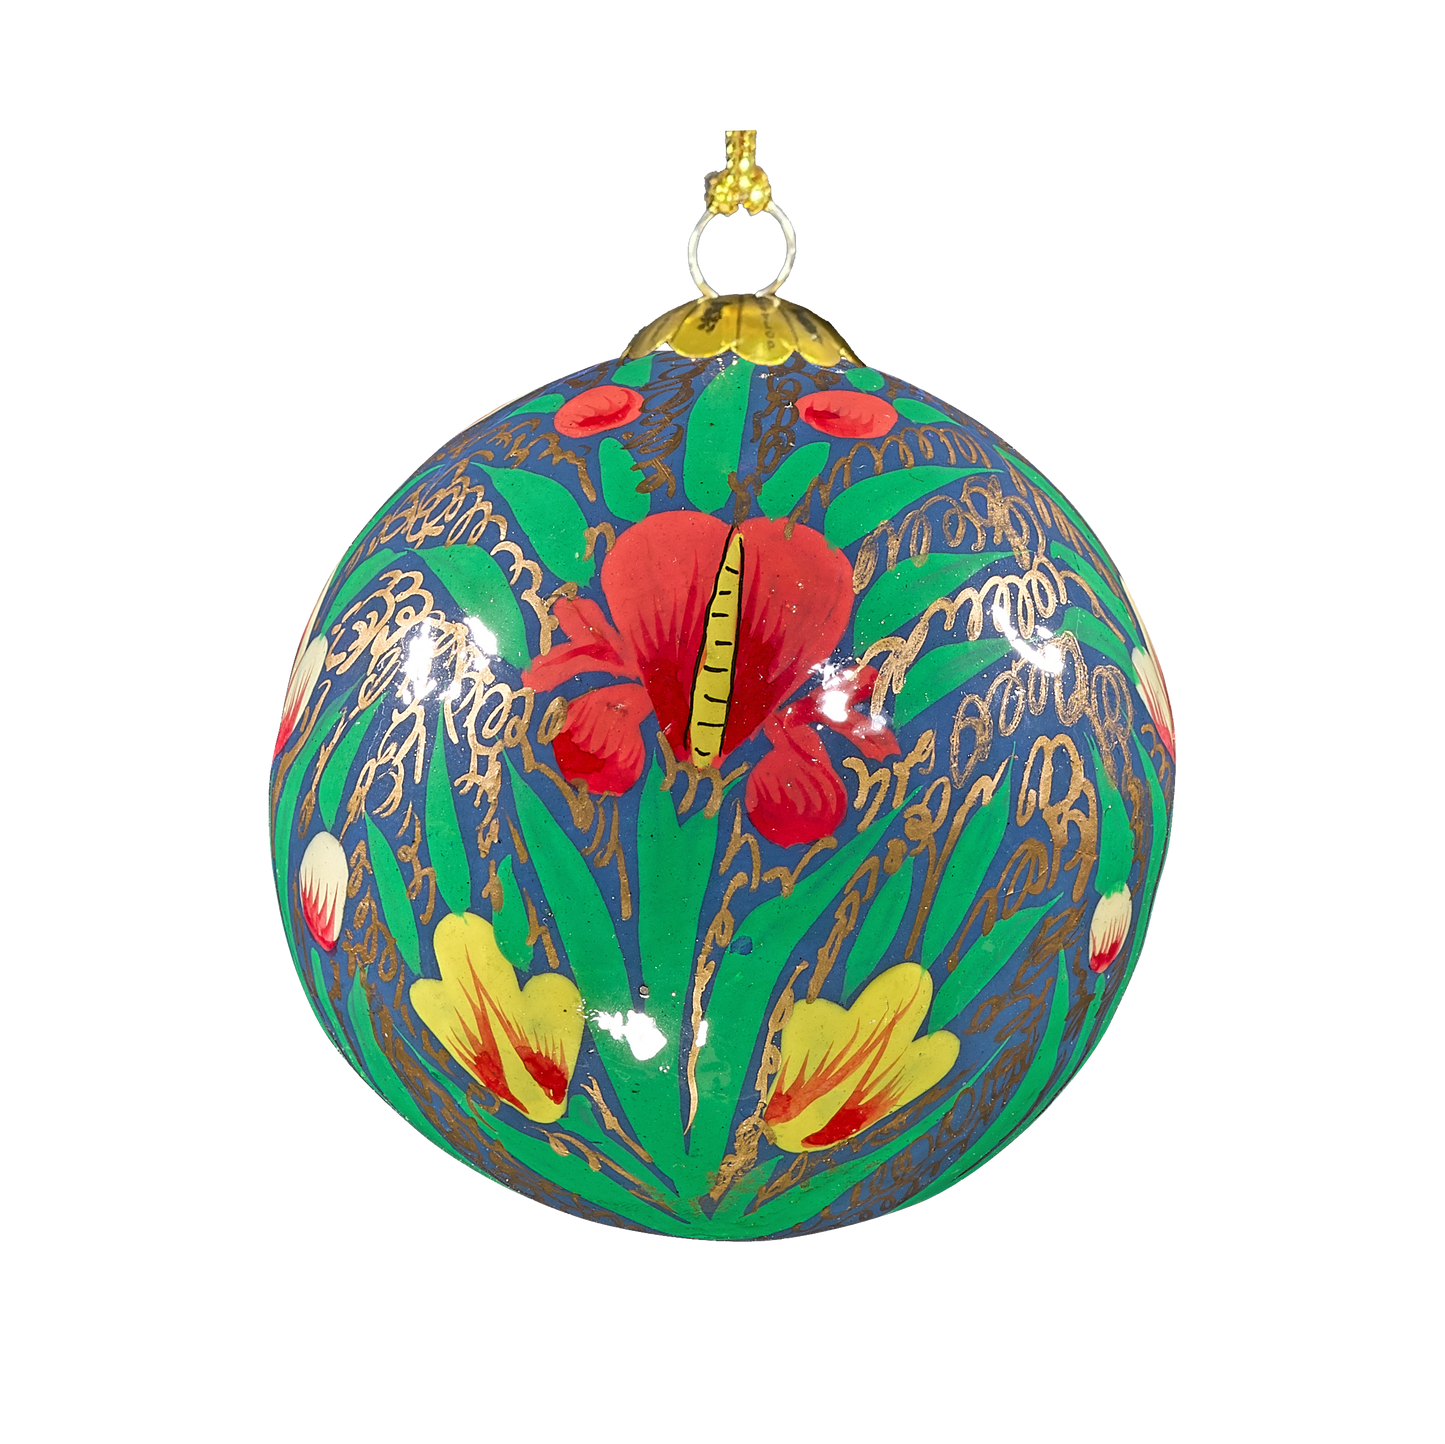 A Field of Tulip Christmas Bauble for Christmas tree decorations